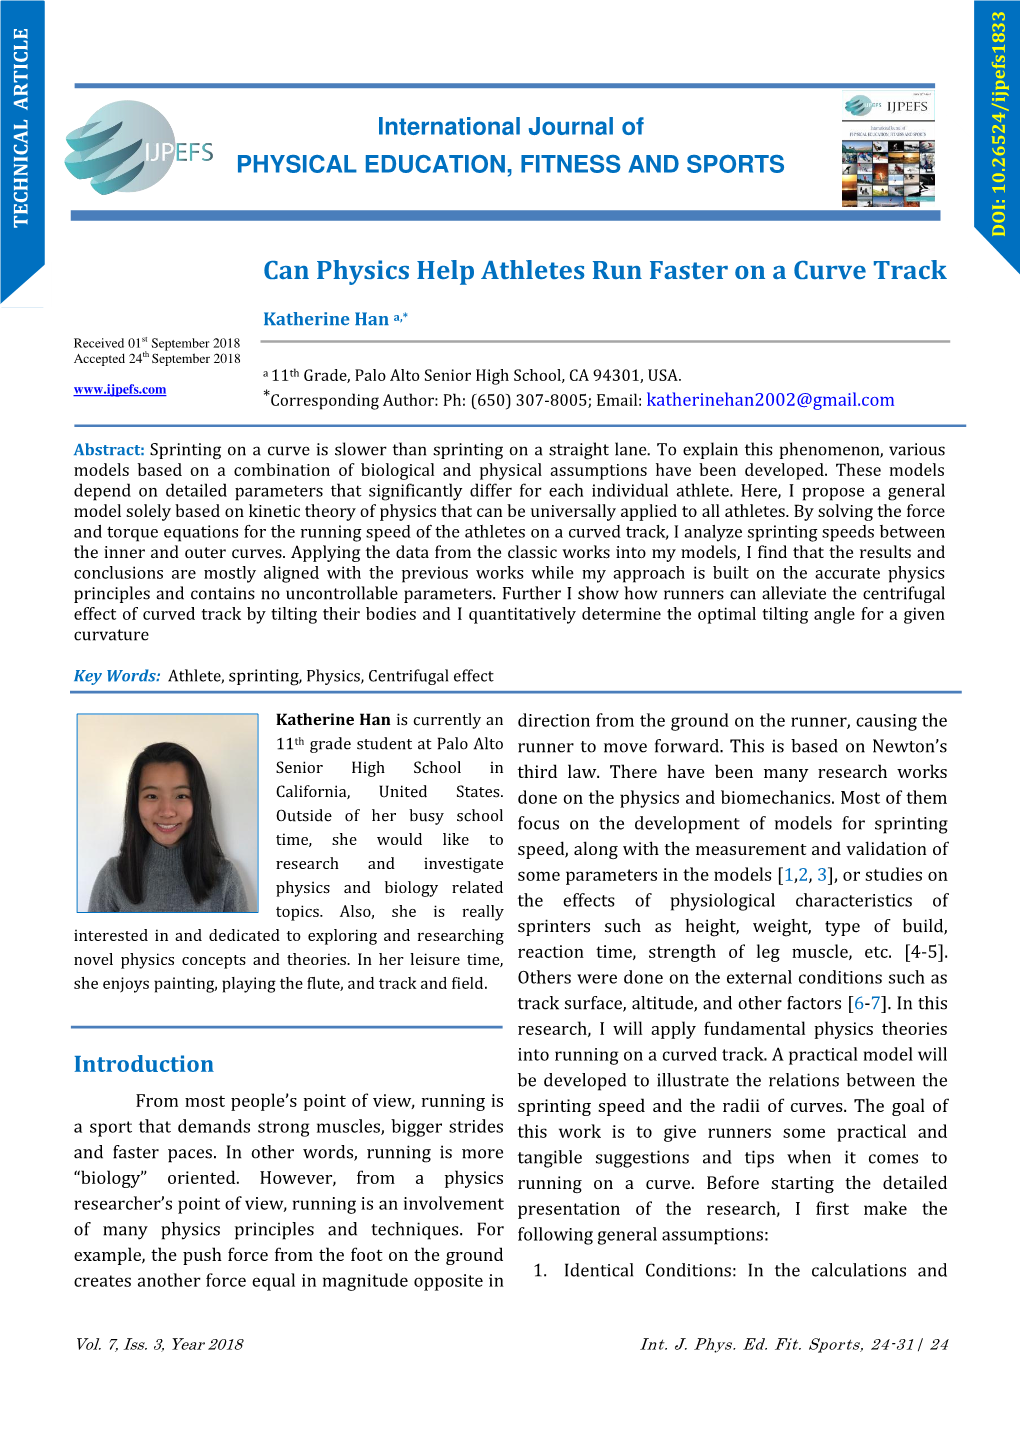 Can Physics Help Athletes Run Faster on a Curve Track